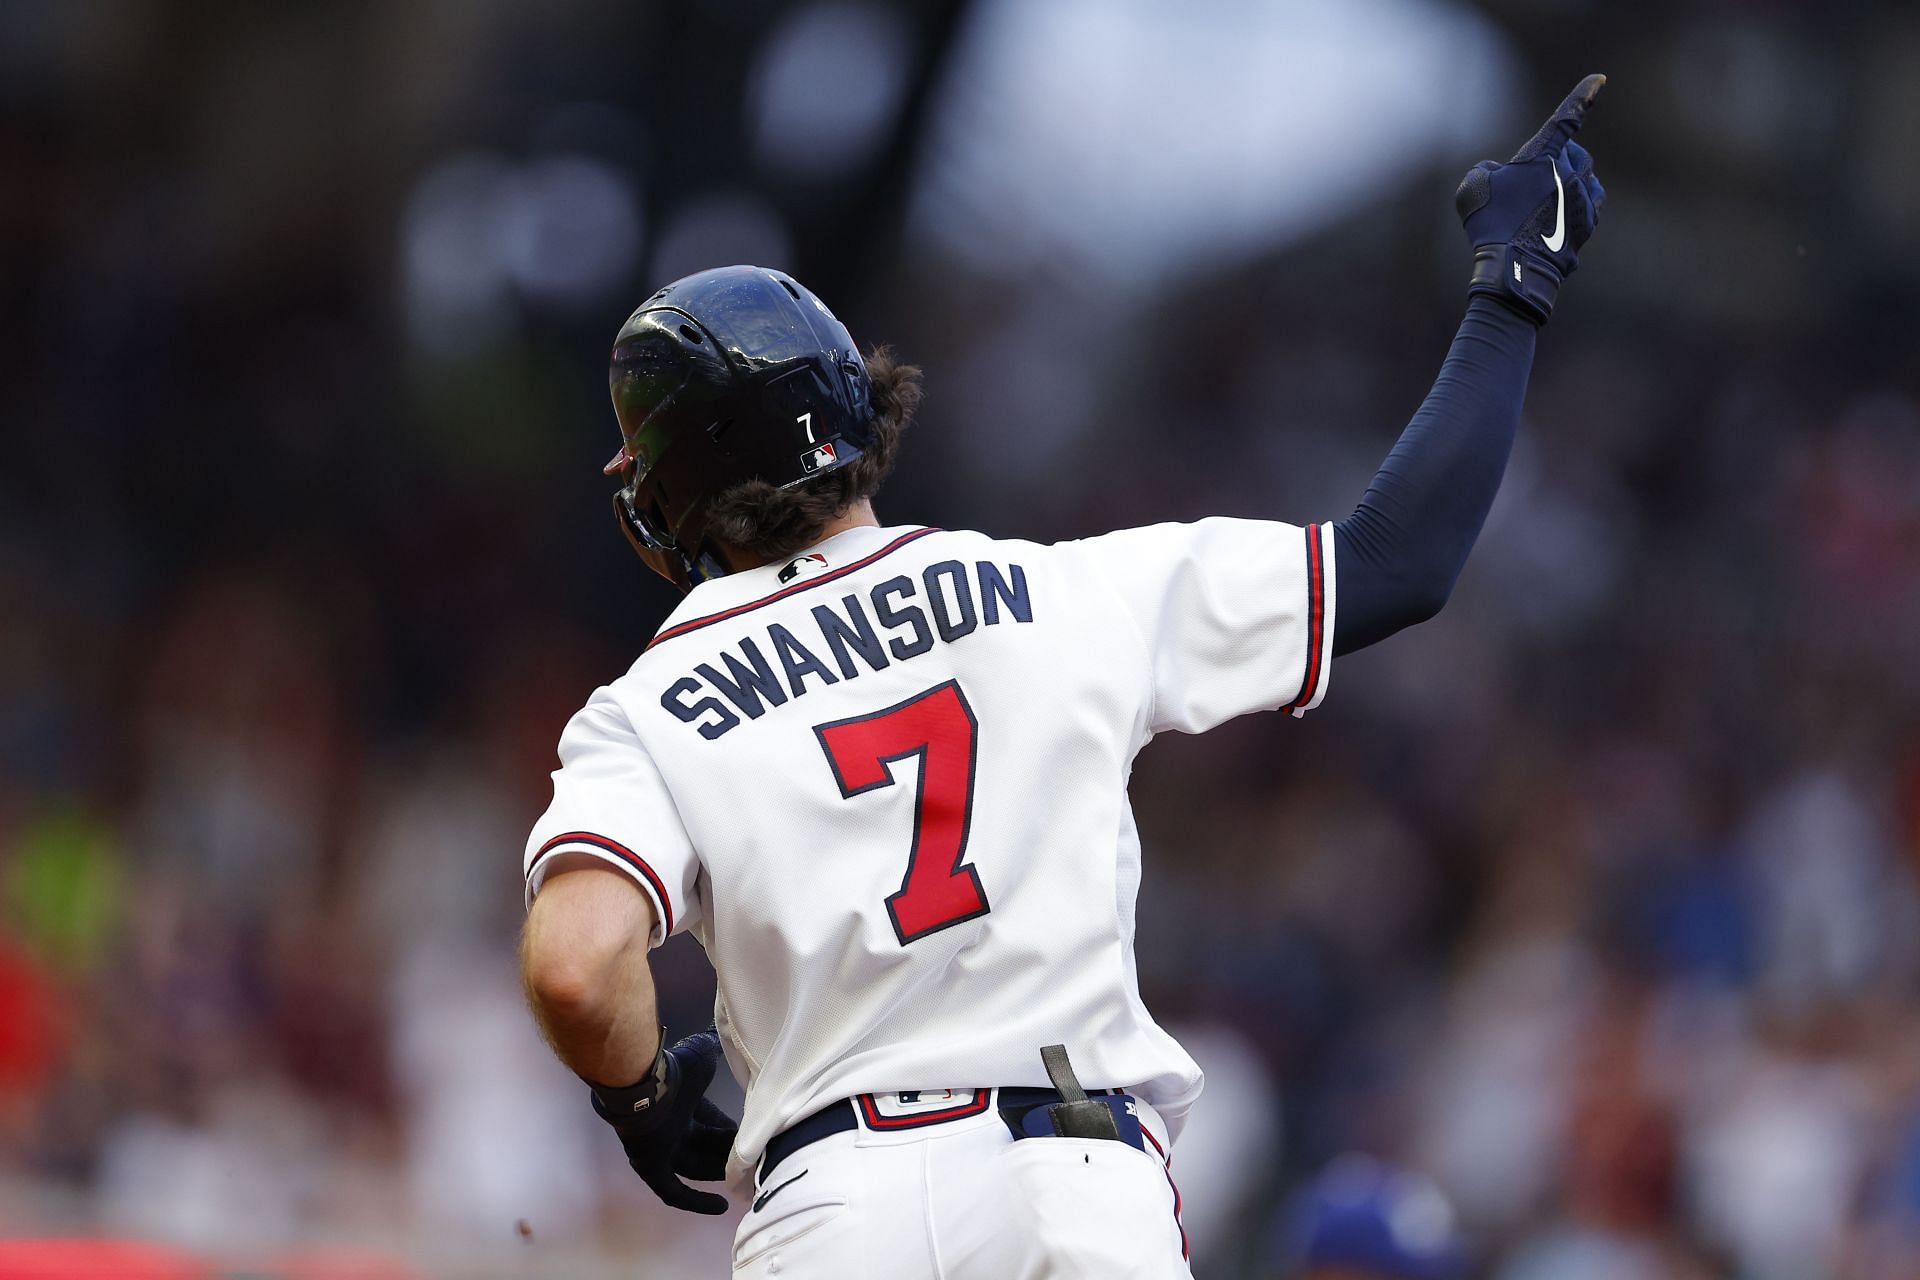 Braves fumbled Dansby Swanson contract Freddie Freeman-style